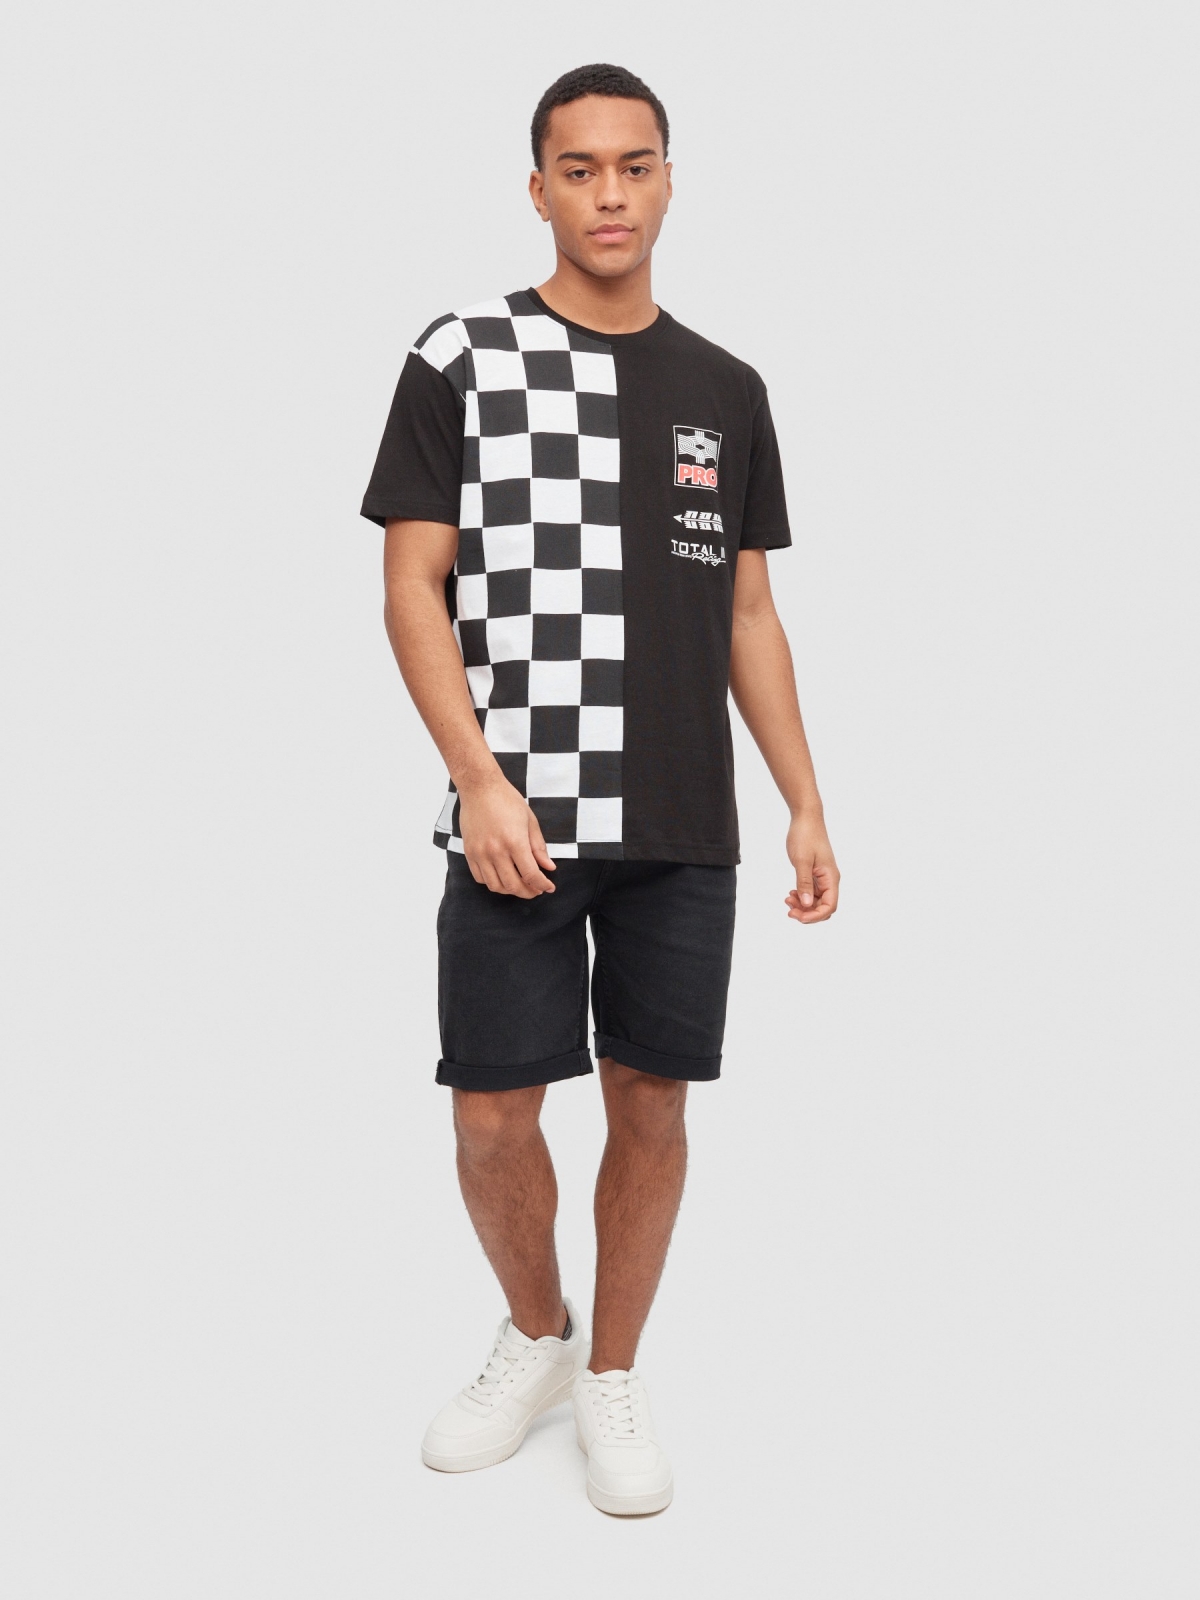 Racing flag t-shirt black front view